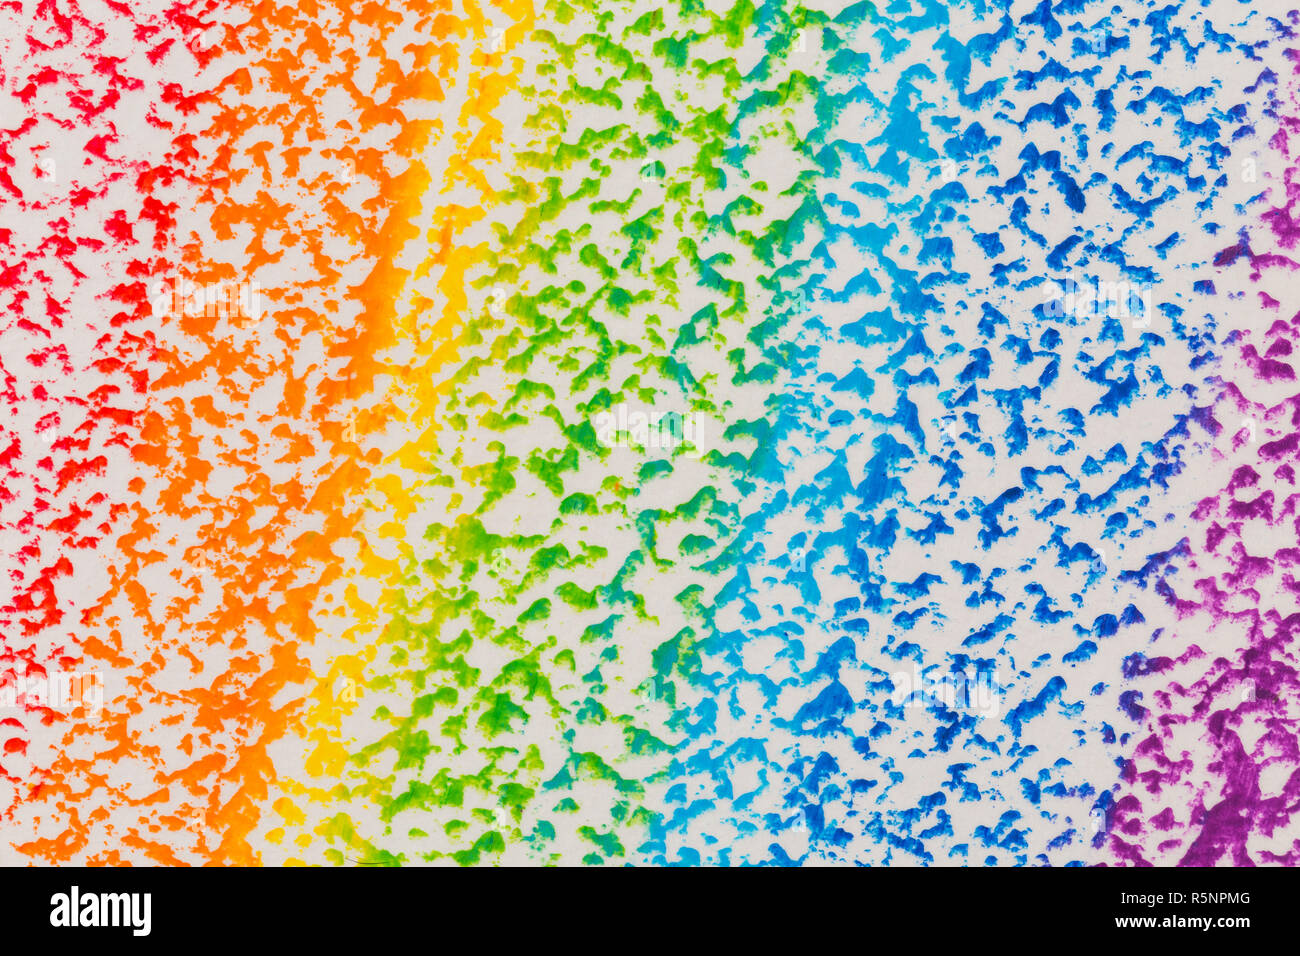 Crayon rainbow background Banque D'Images